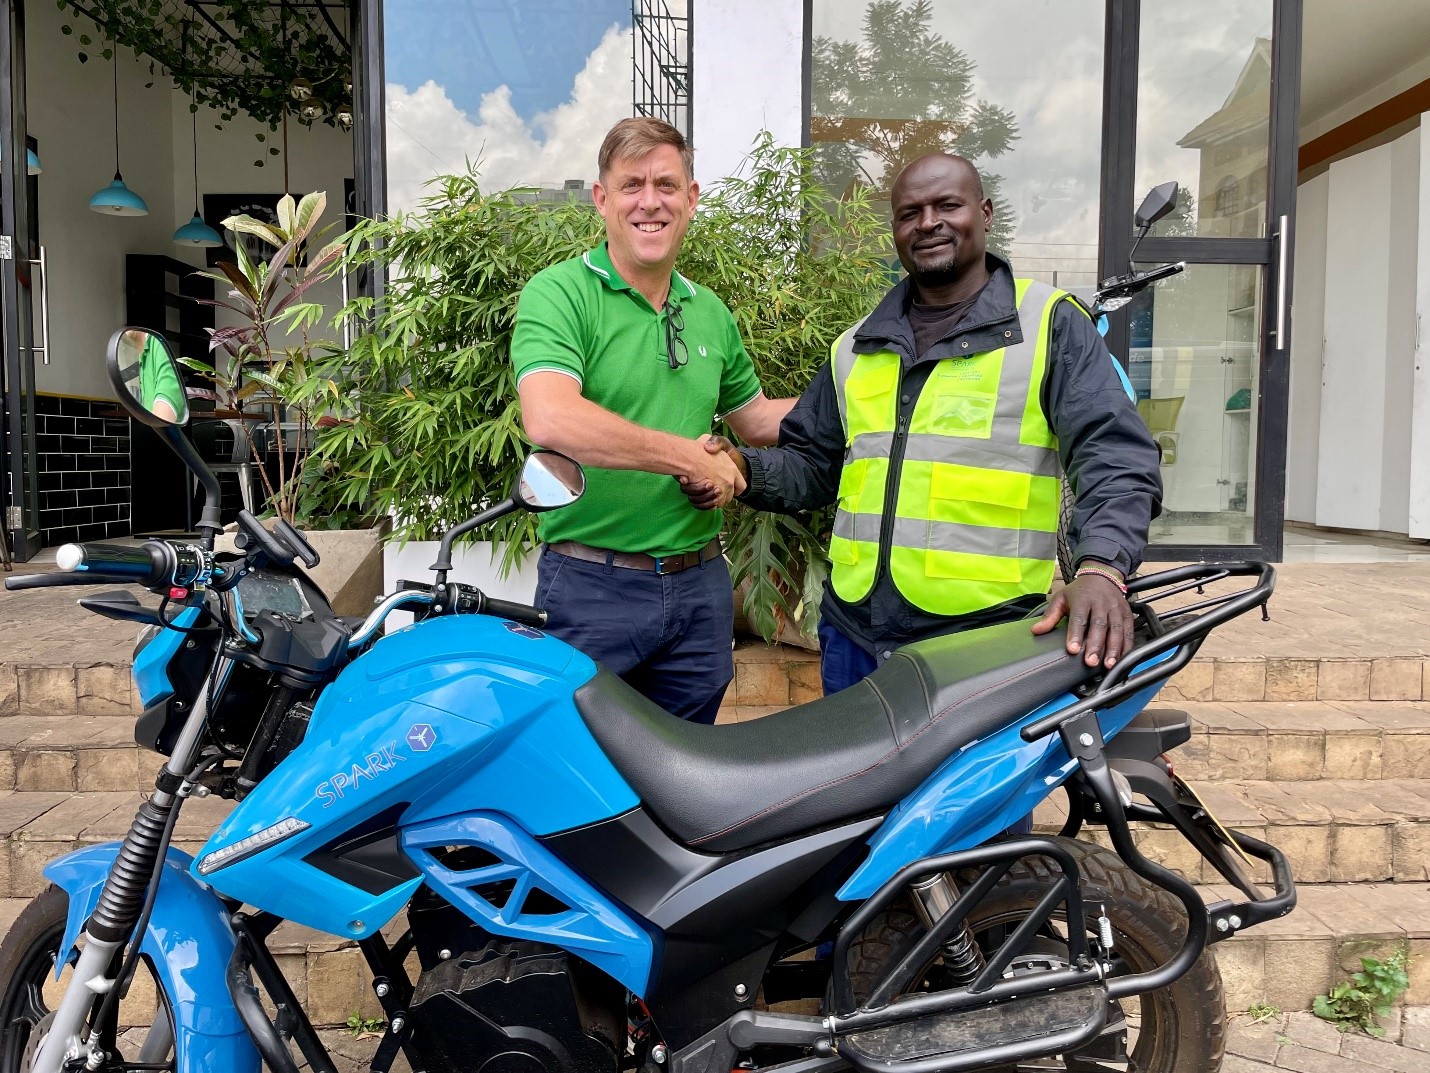 Powerhive CEO Christopher Hornor and Manasse Akhwale, a rider recently financed by 4G Capital